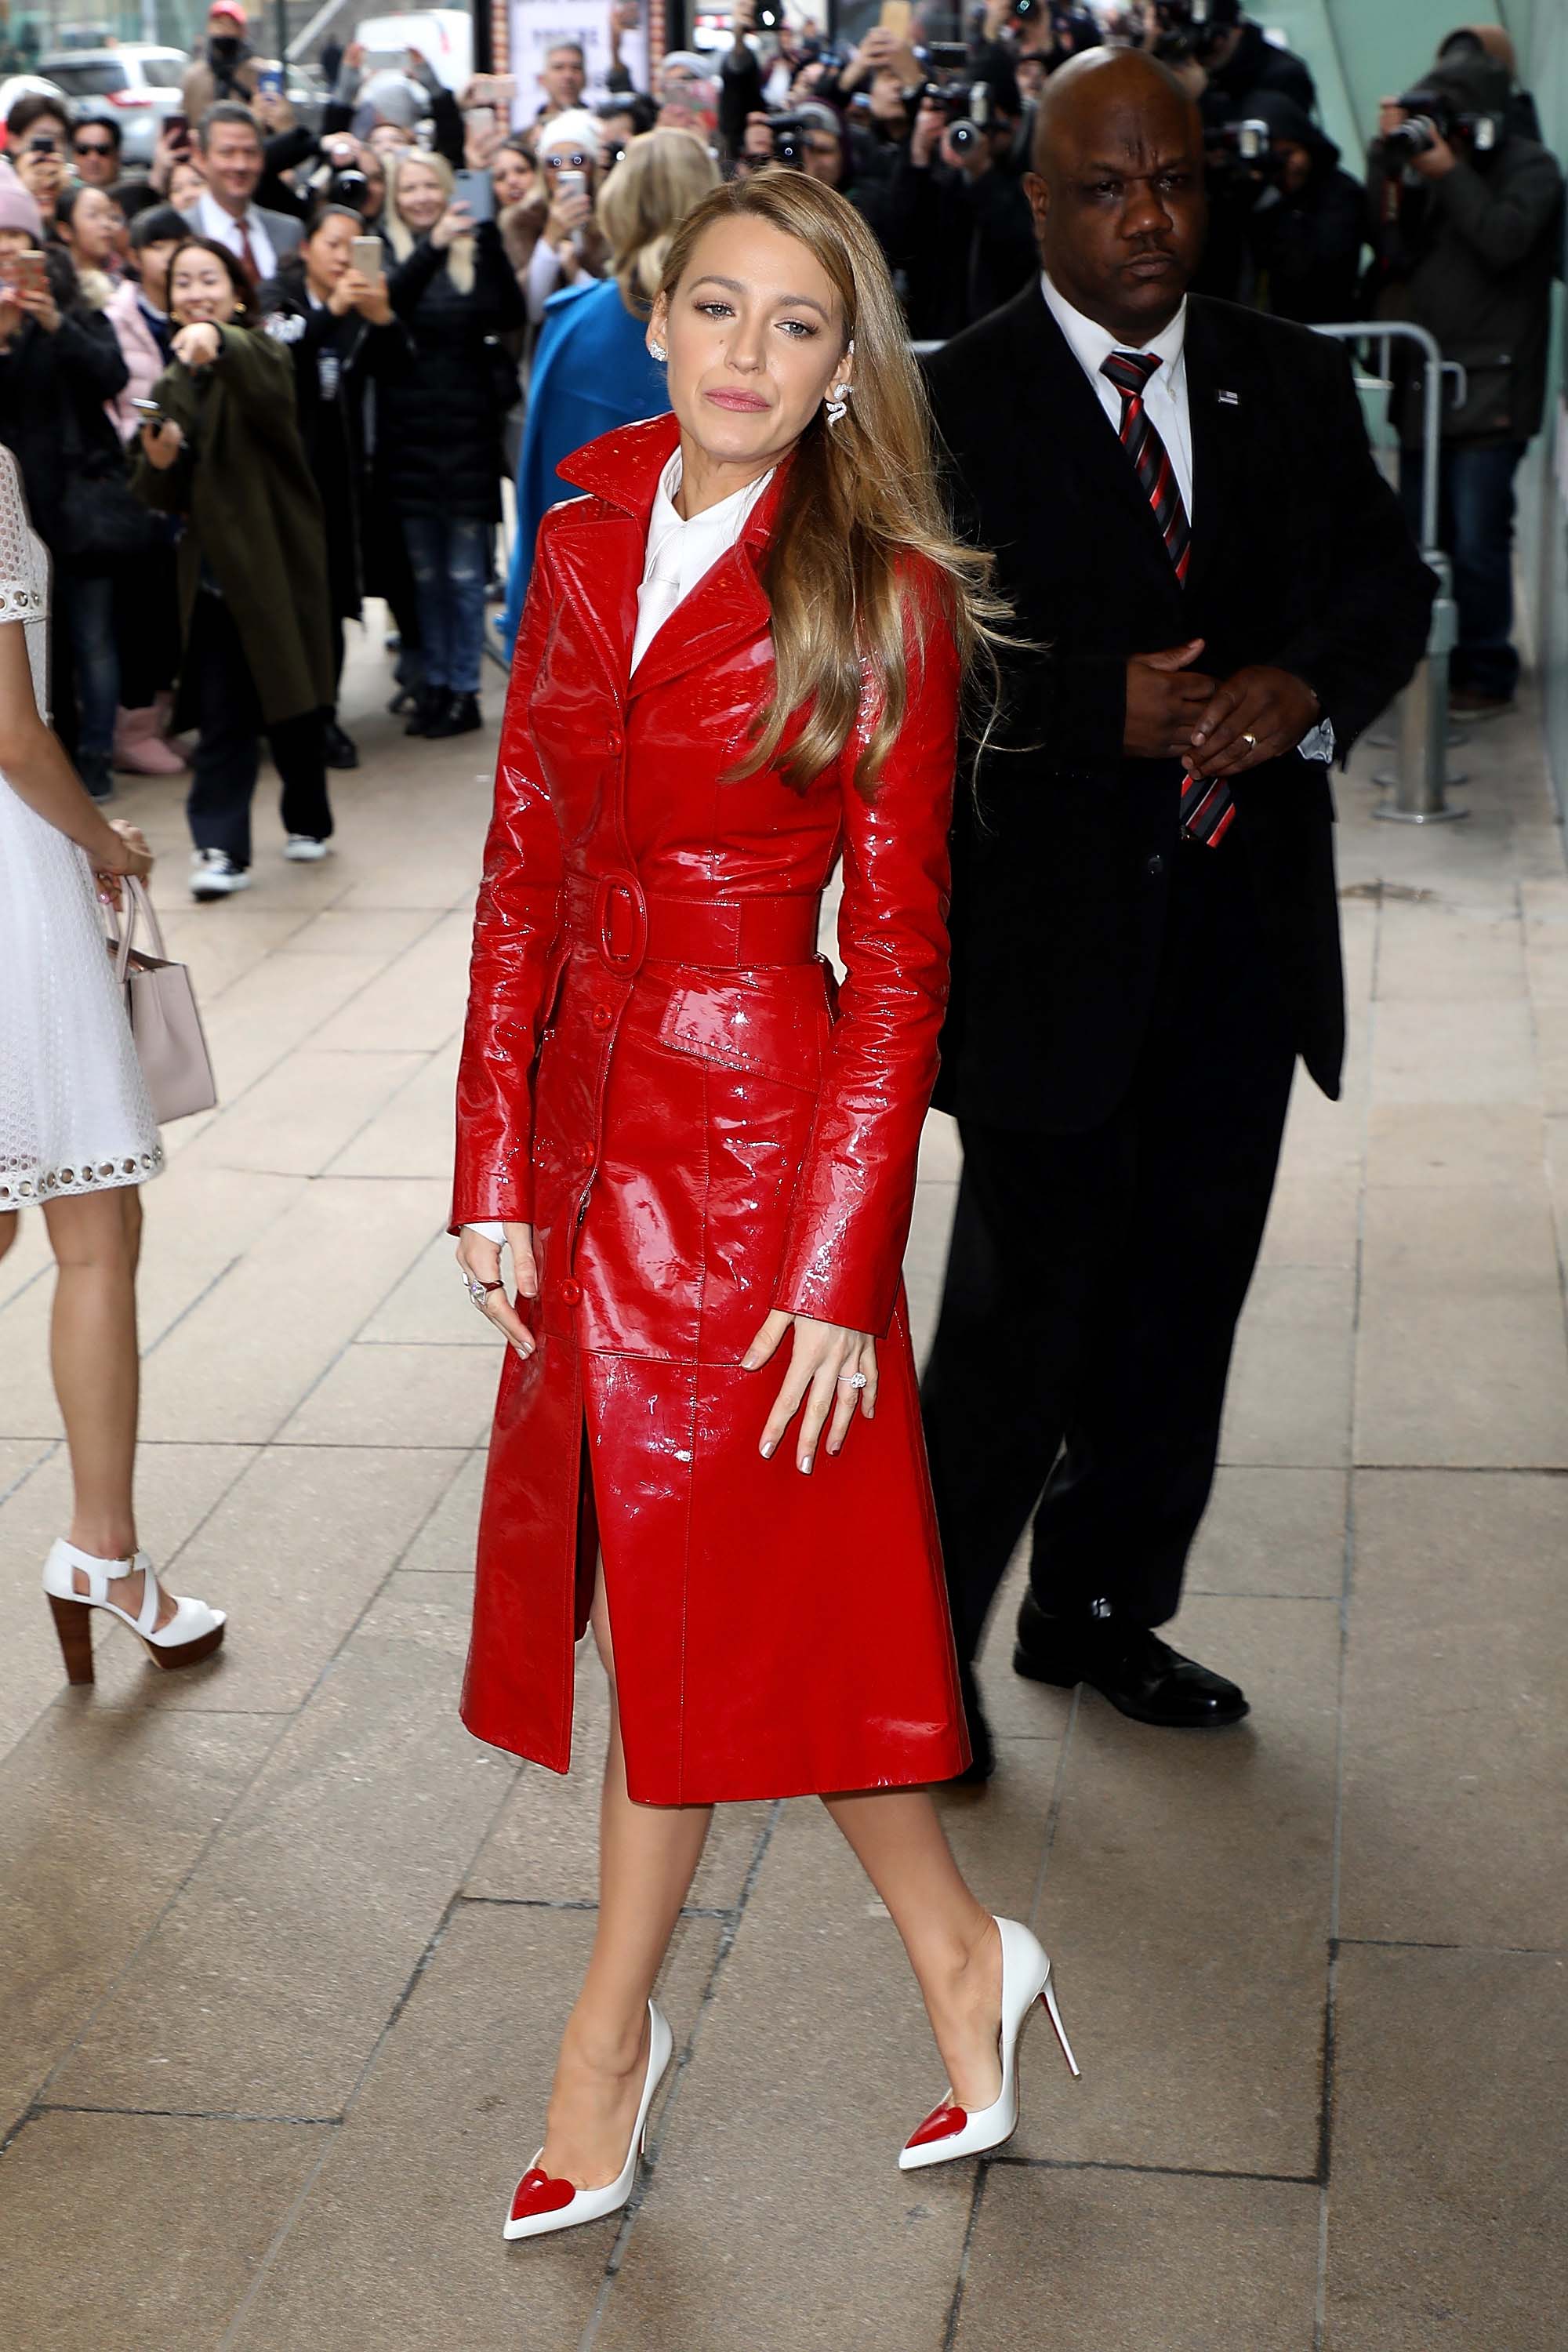 Blake Lively arrives at the Michael Kors show